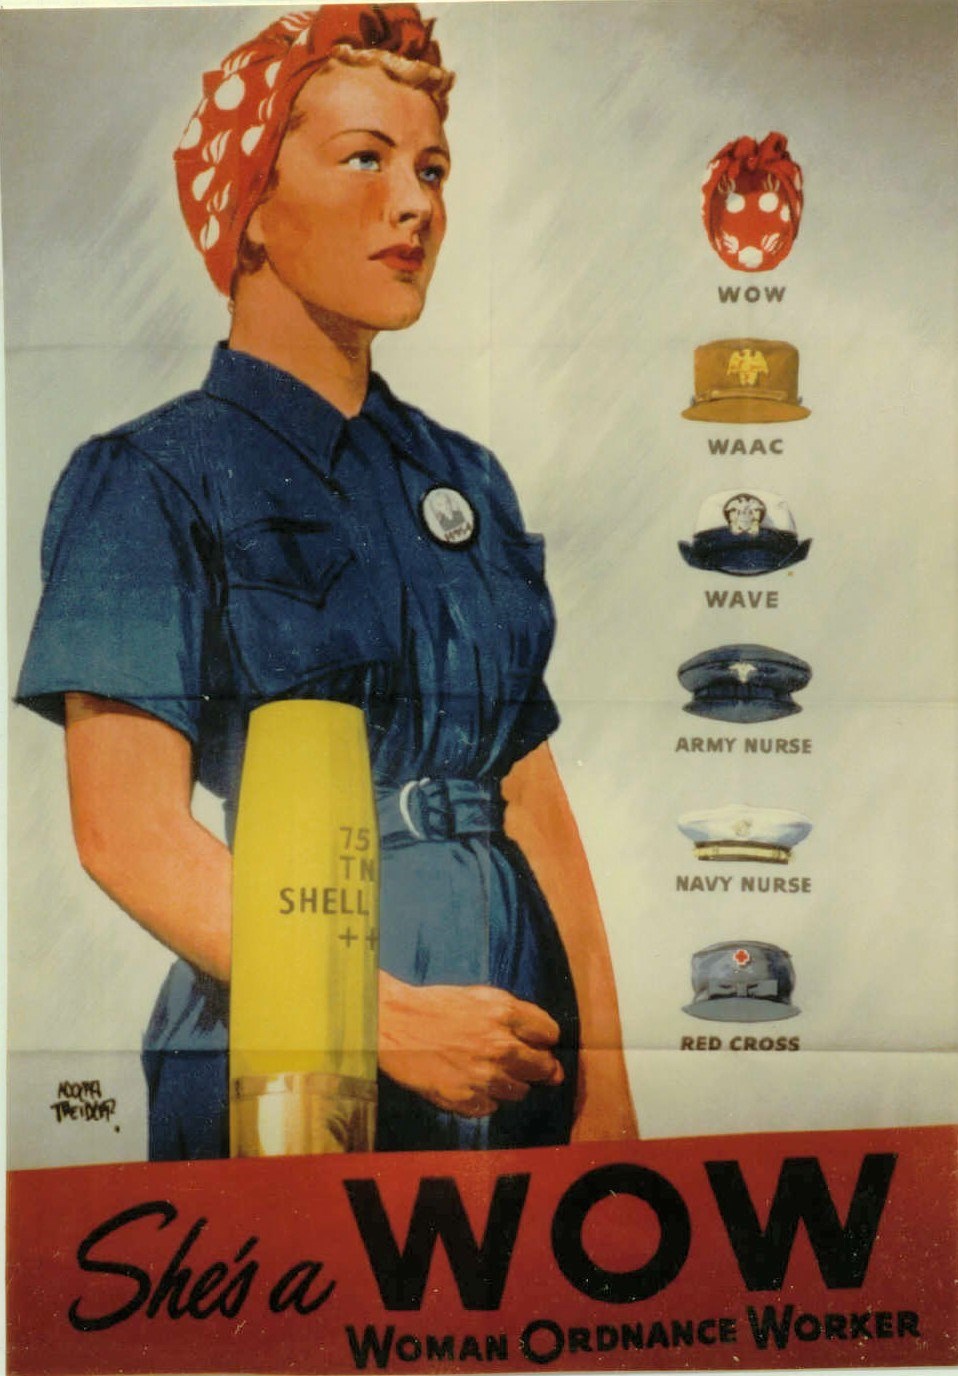 World War II Rosie The Riveter Shes A WOW Woman Ordnance Worker Poster